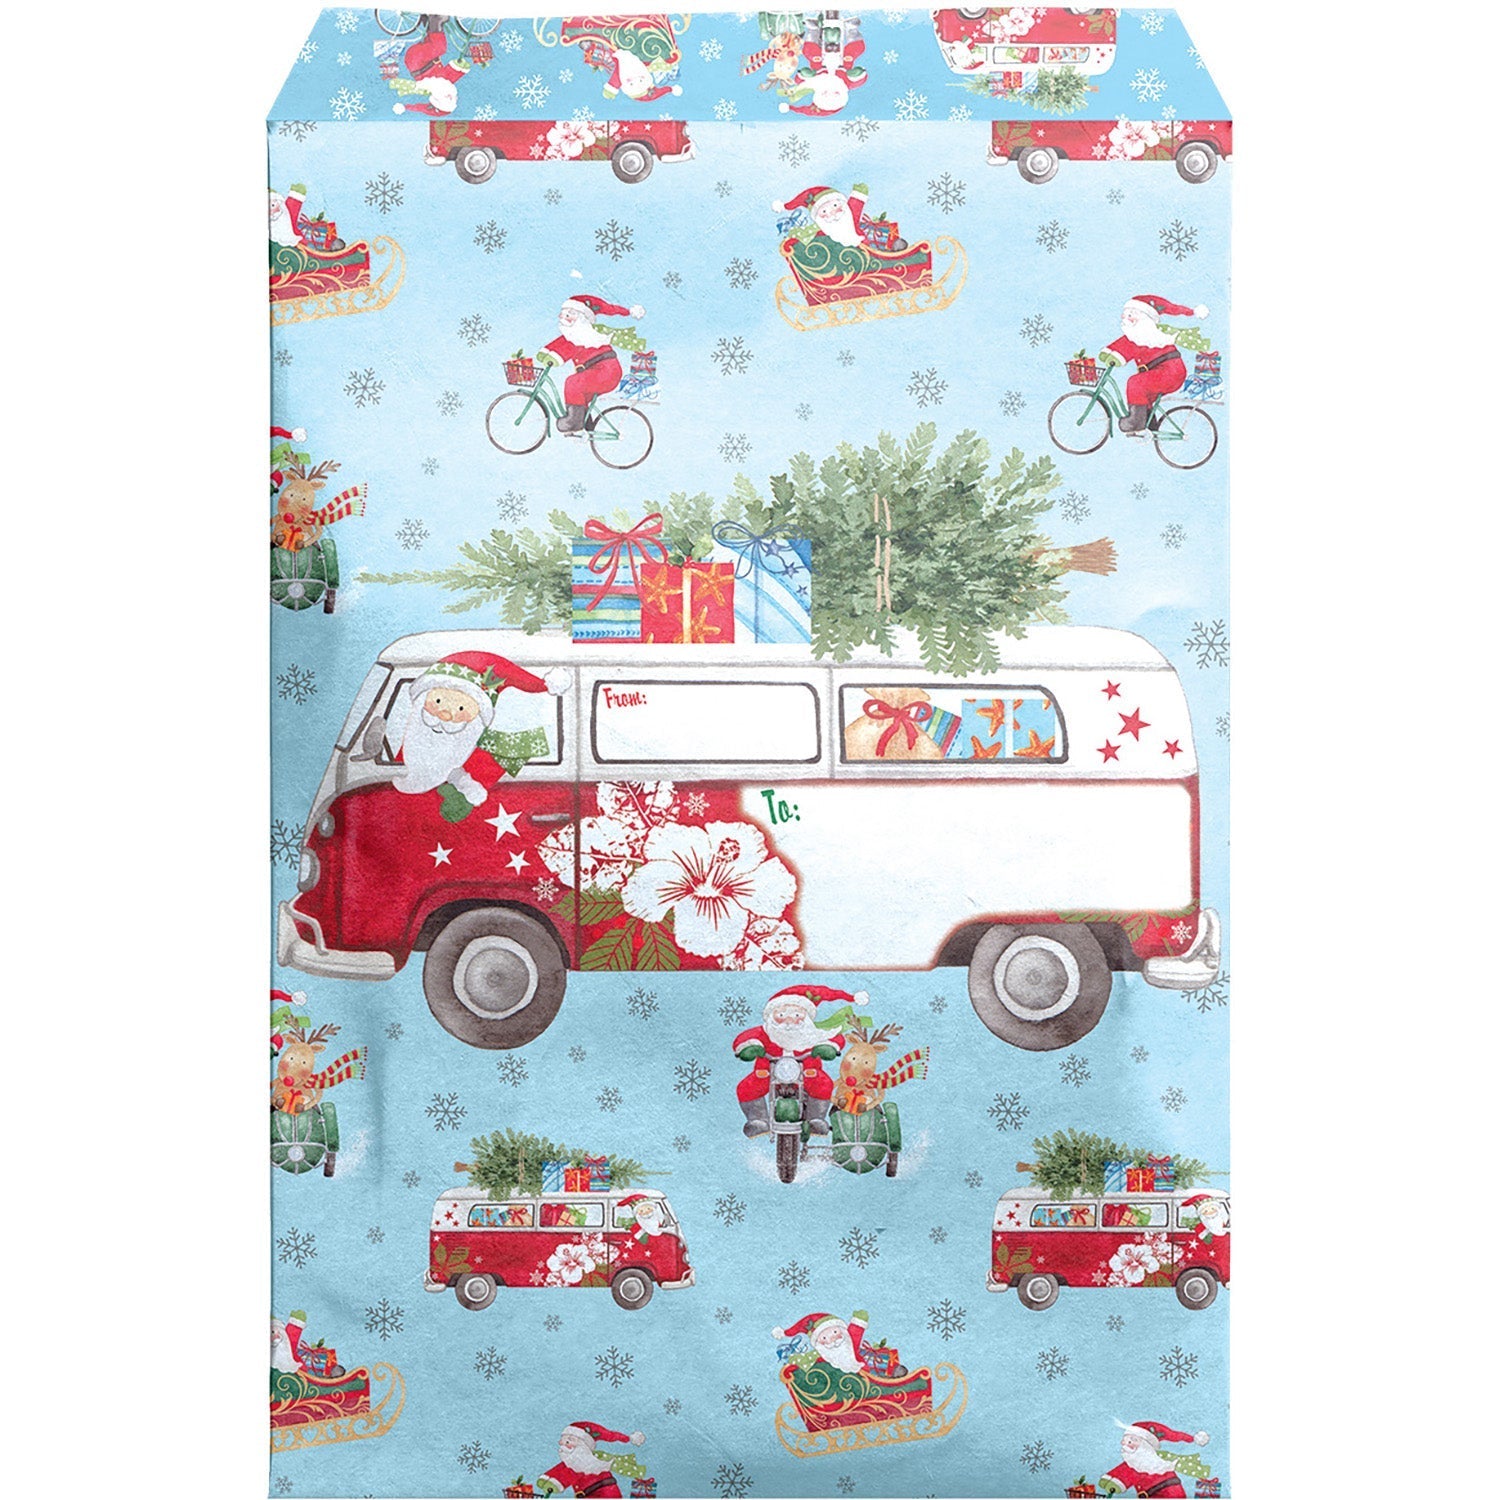 Medium Christmas Printed Padded Mailing Envelopes, Out for Delivery